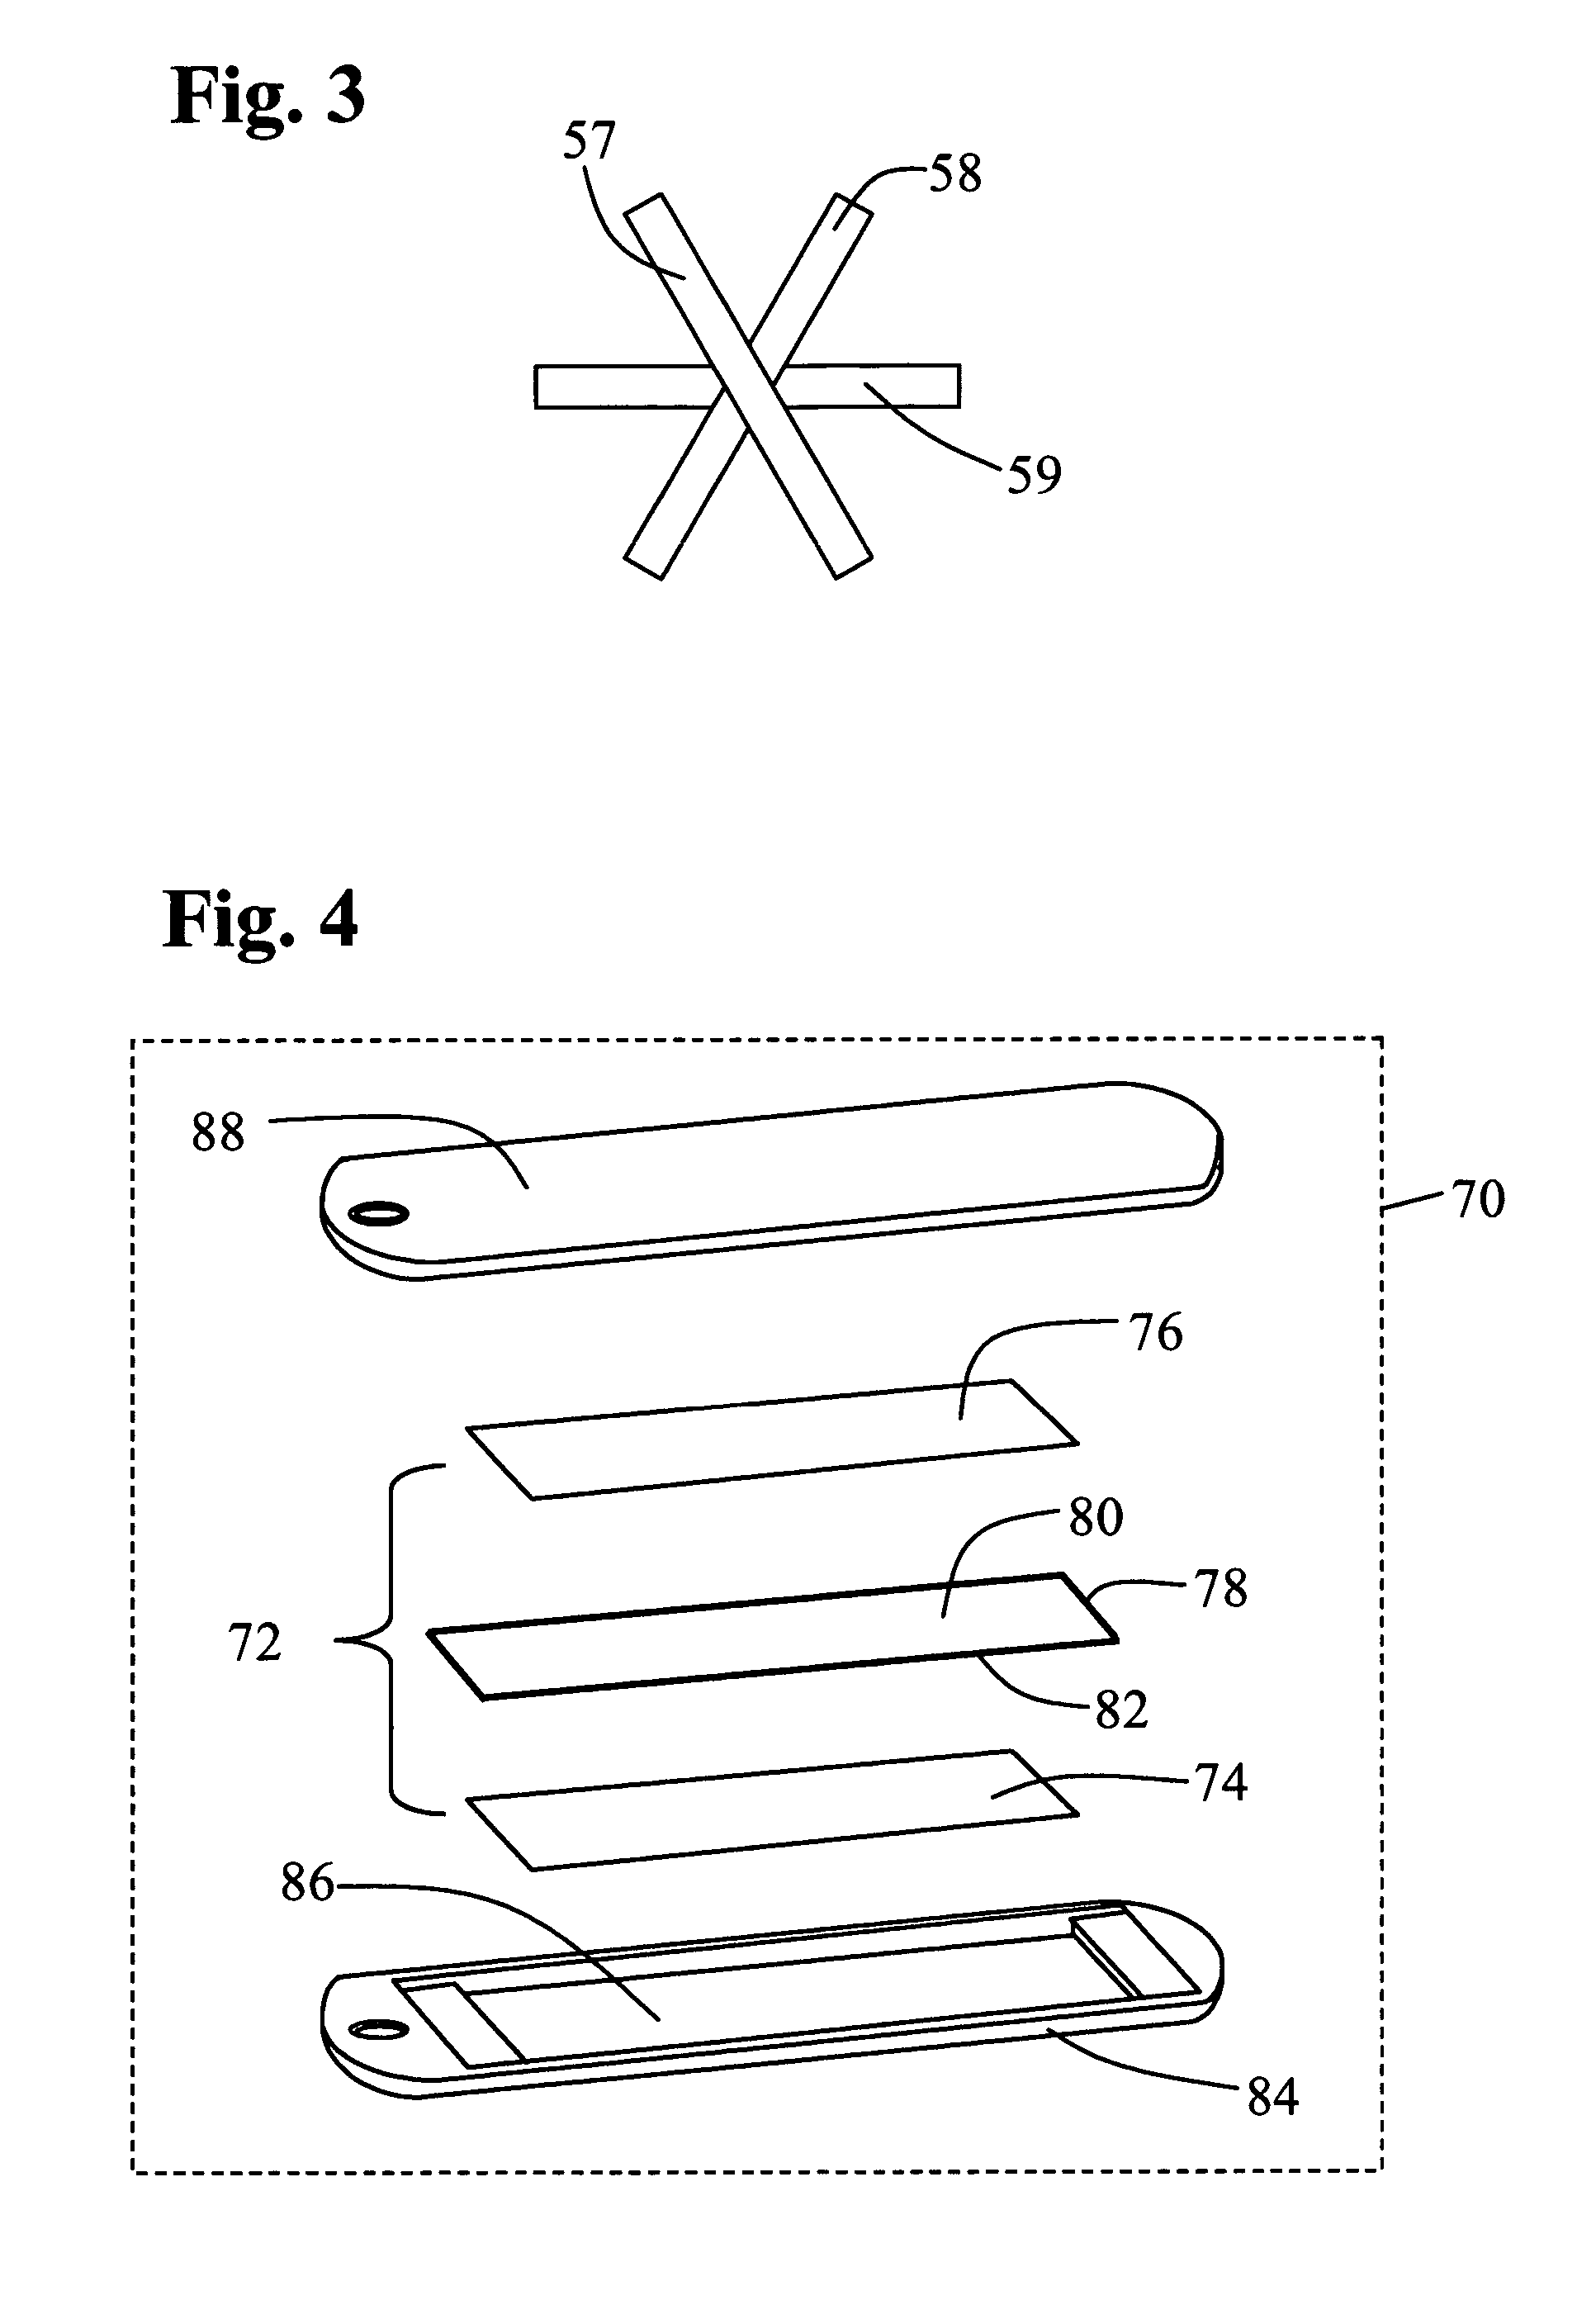 Miniature magnetomechanical tag for detecting surgical sponges and implements